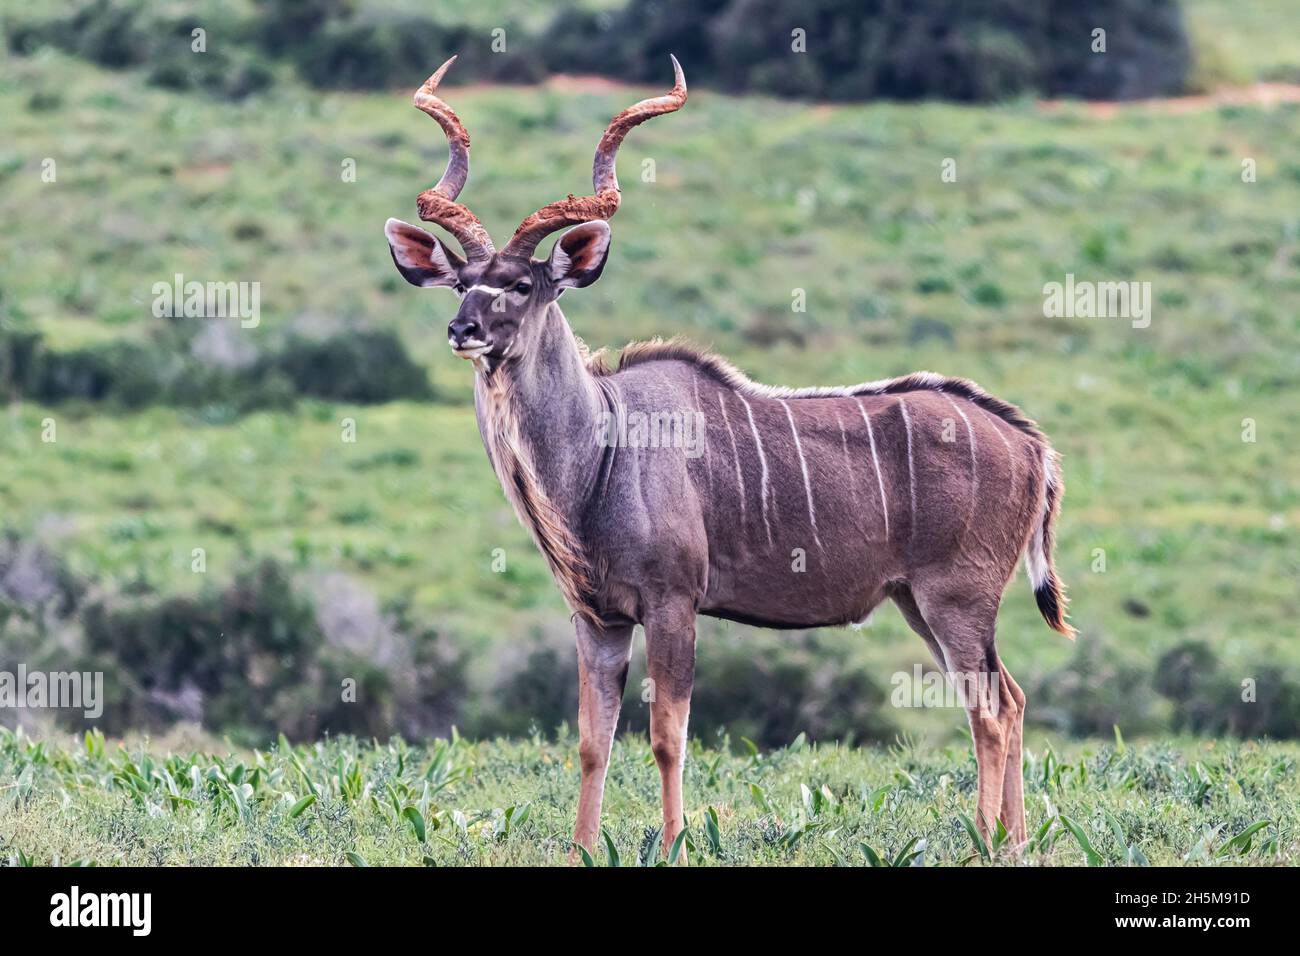 A male Greater kudu (Tragelaphus strepsiceros) at the grassland of Addo Elephant National Park, South Africa. Stock Photo